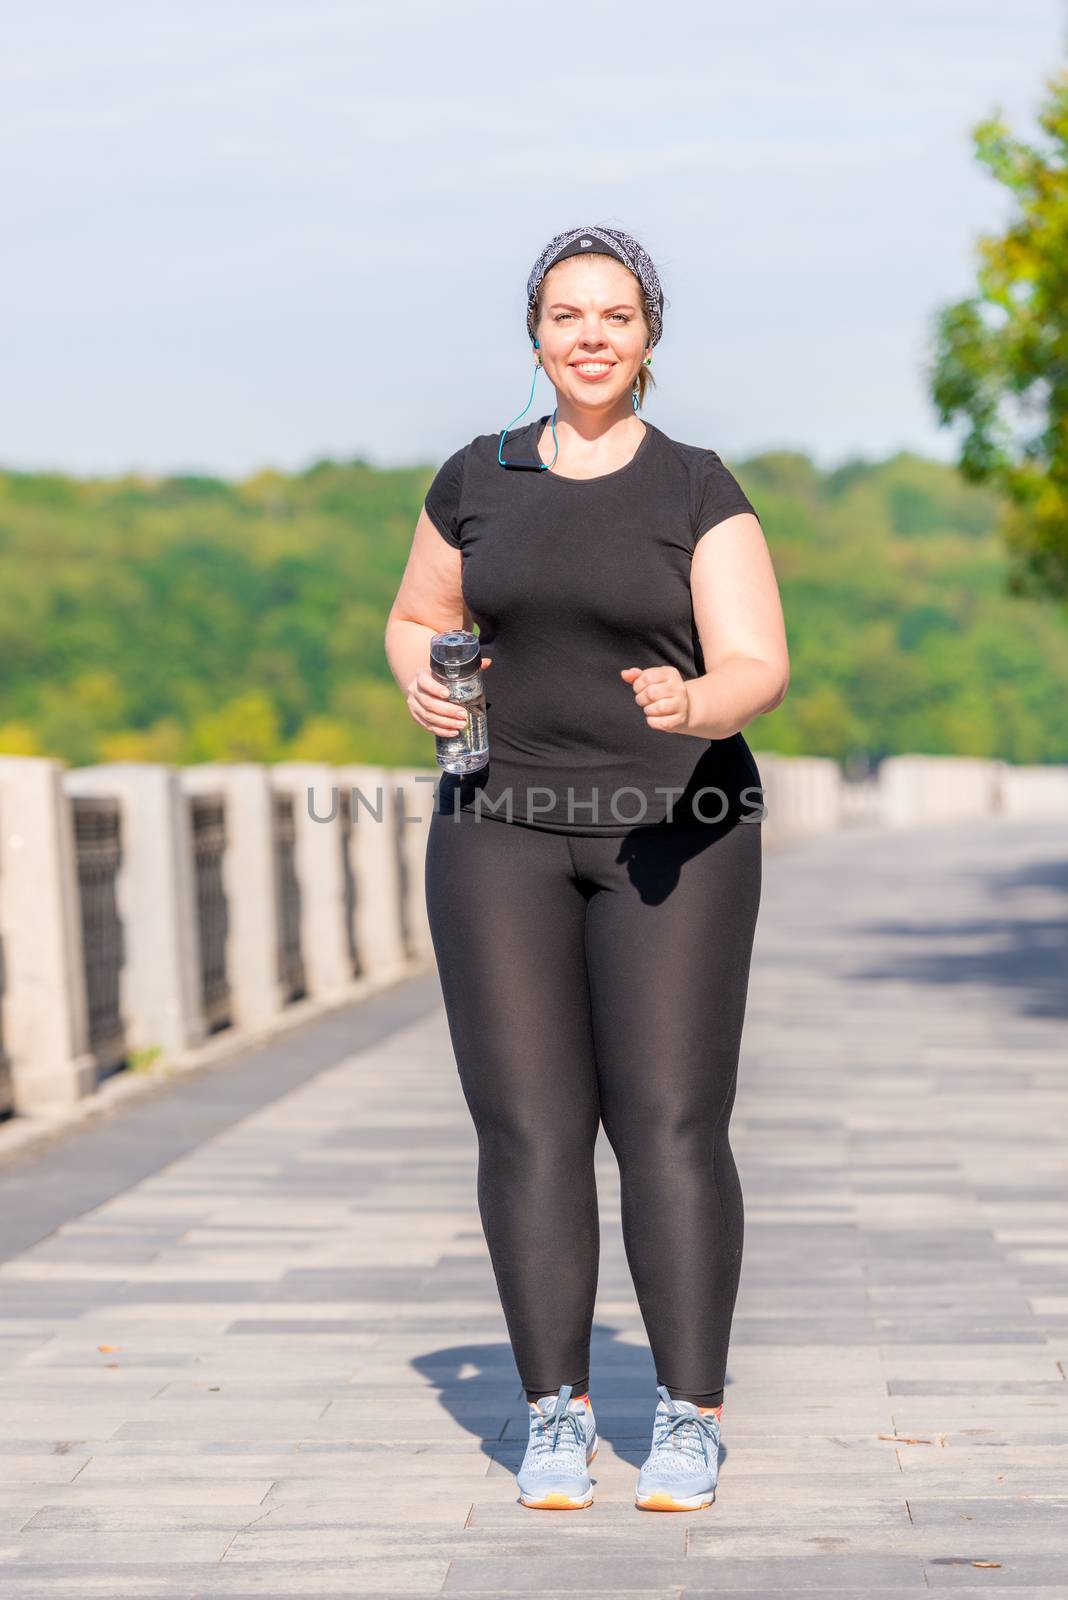 over size woman while jogging in the early morning in the park by kosmsos111